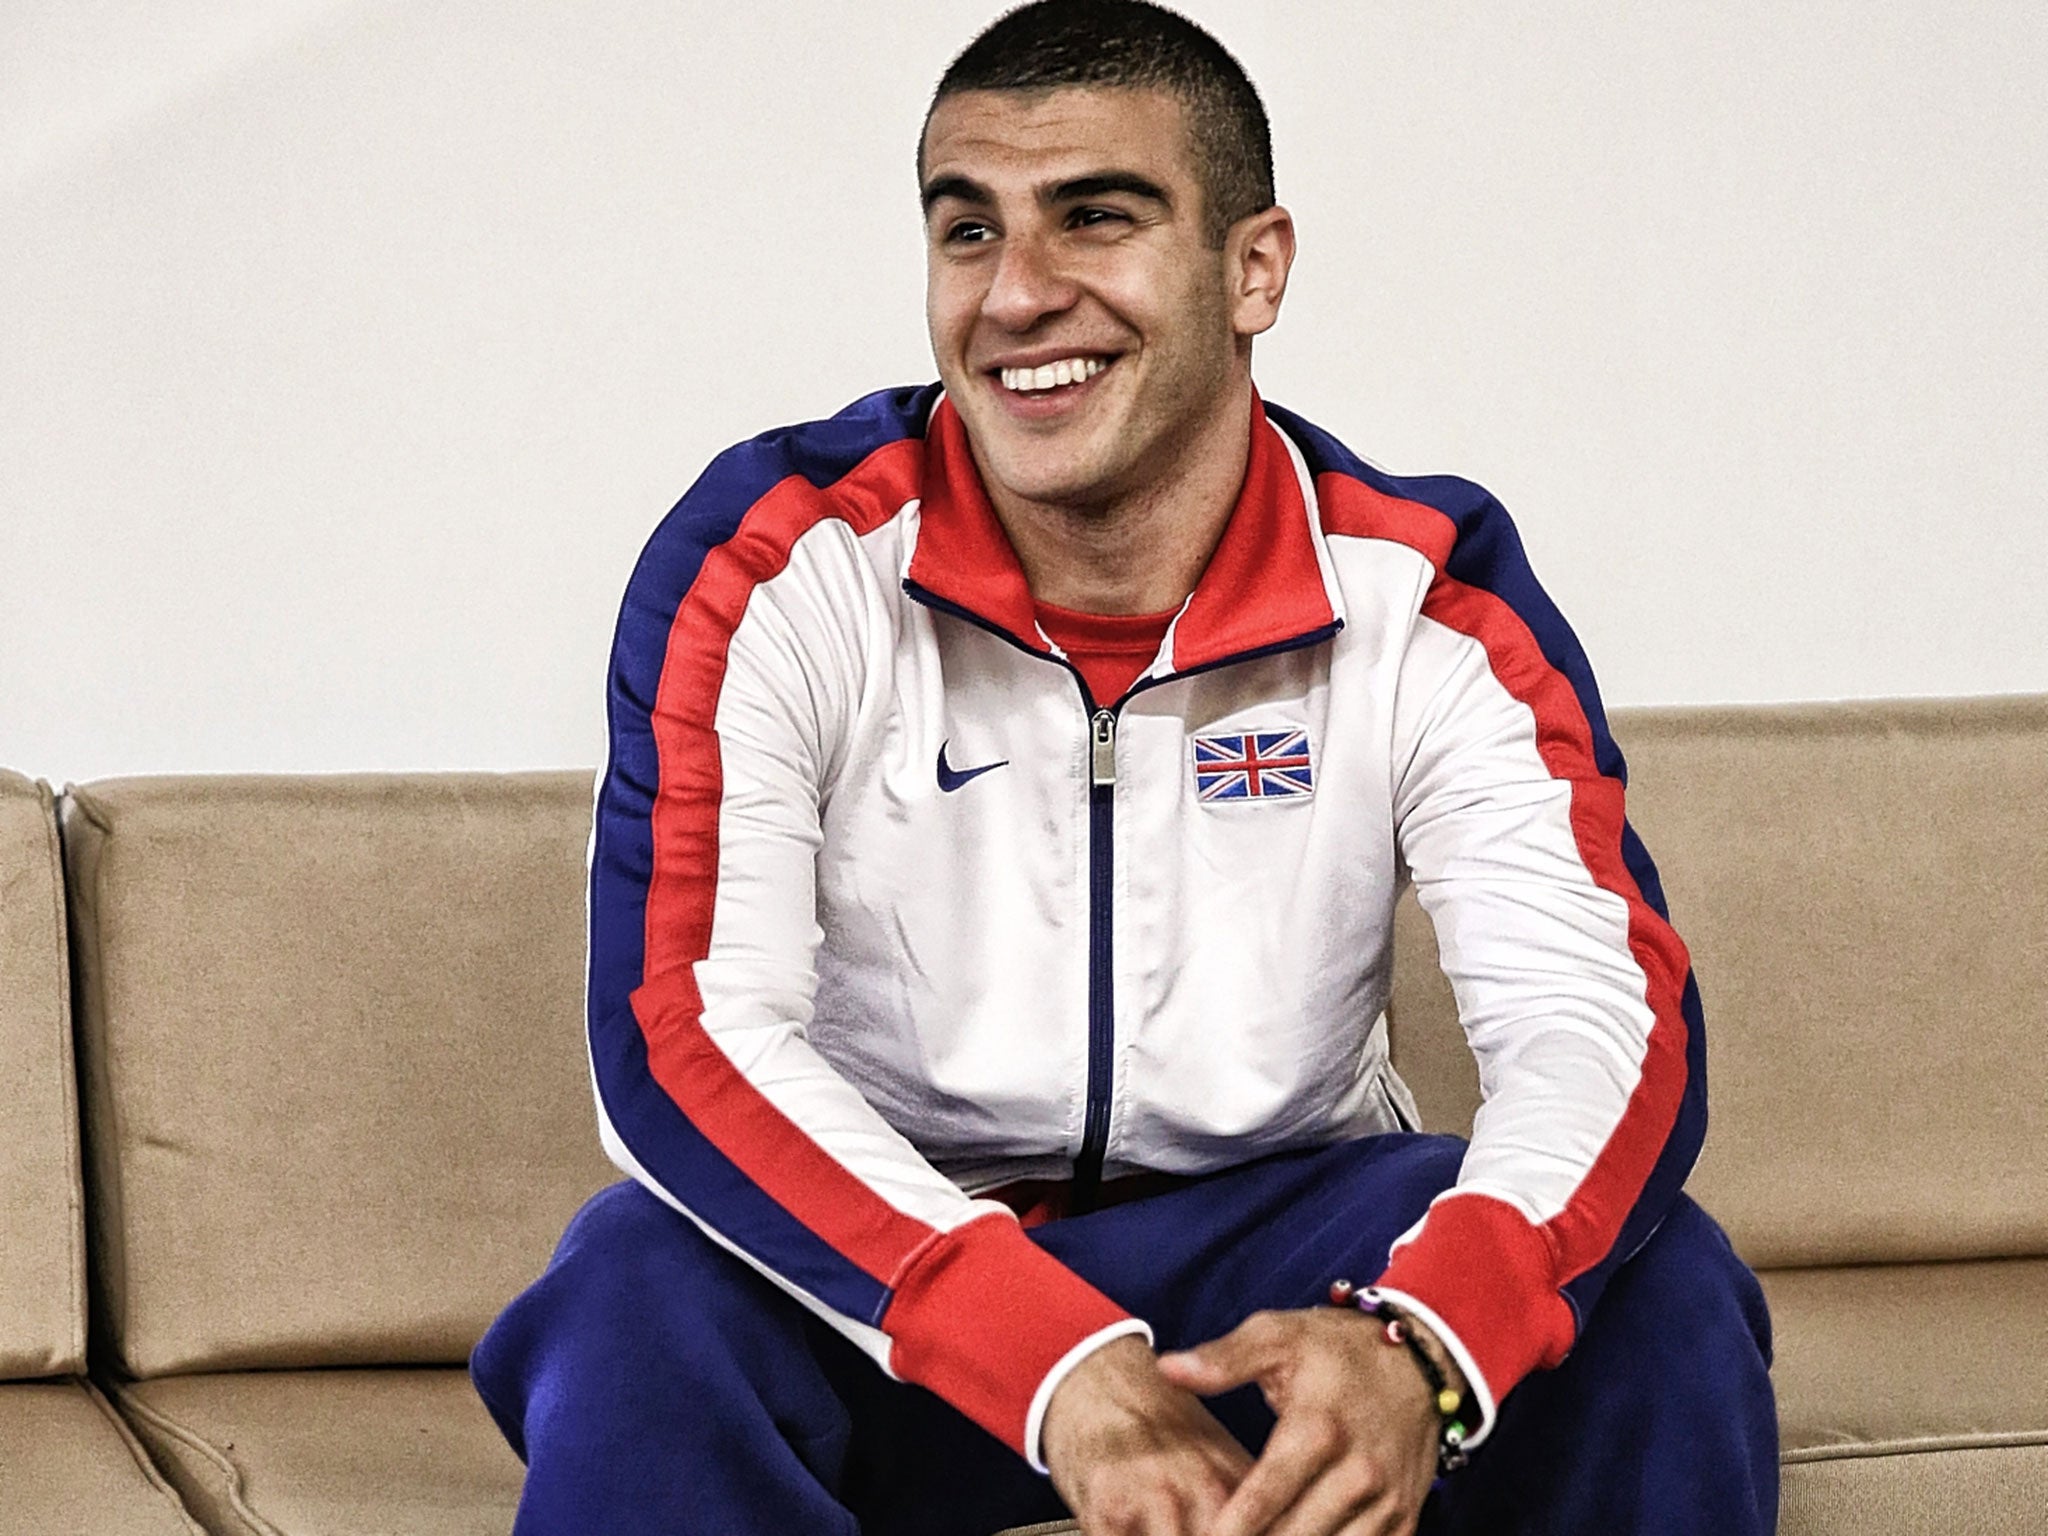 Adam Gemili says he is now more established with the 100m